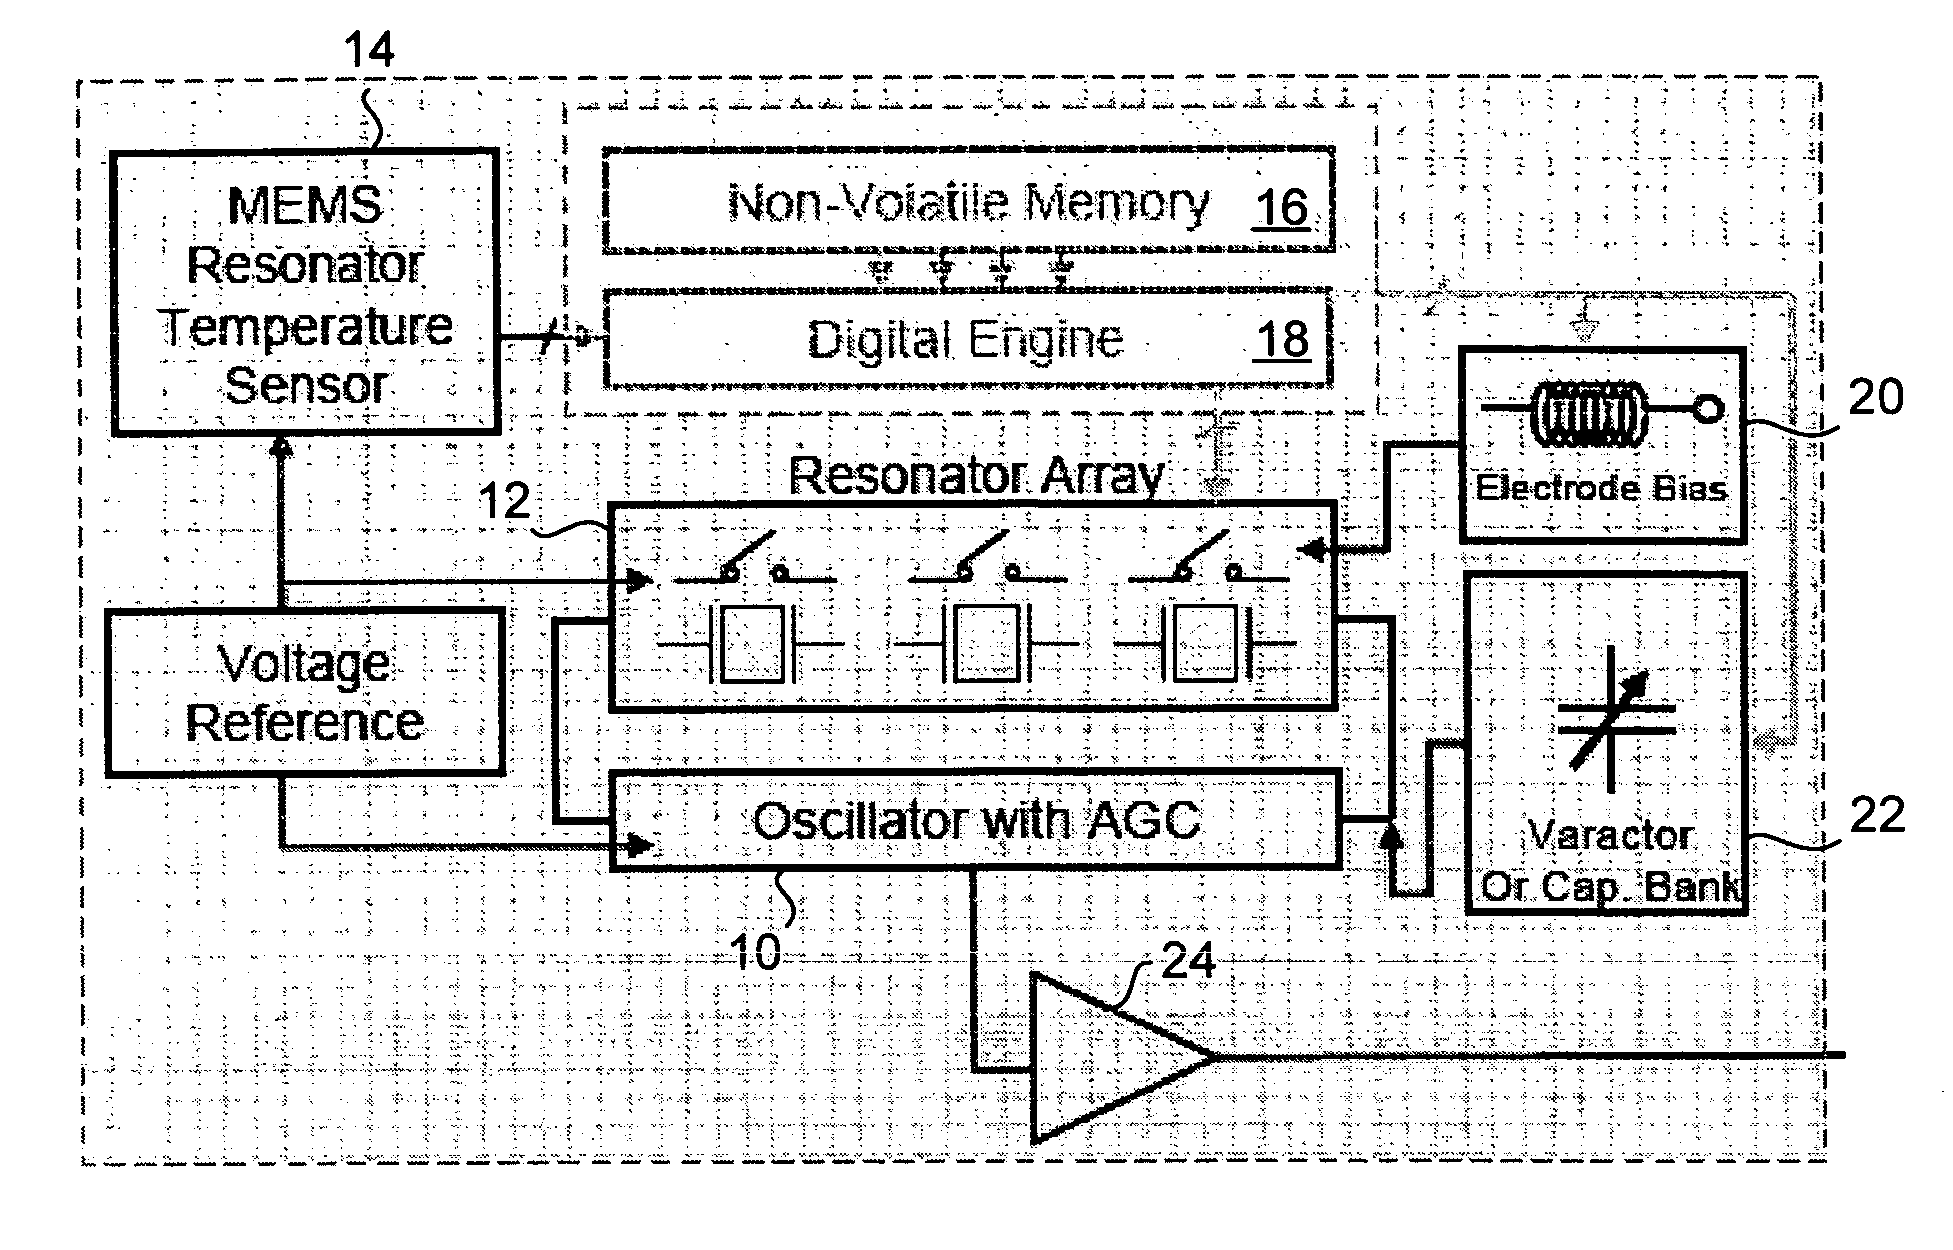 Temperature compensated oscillator including MEMS resonator for frequency control